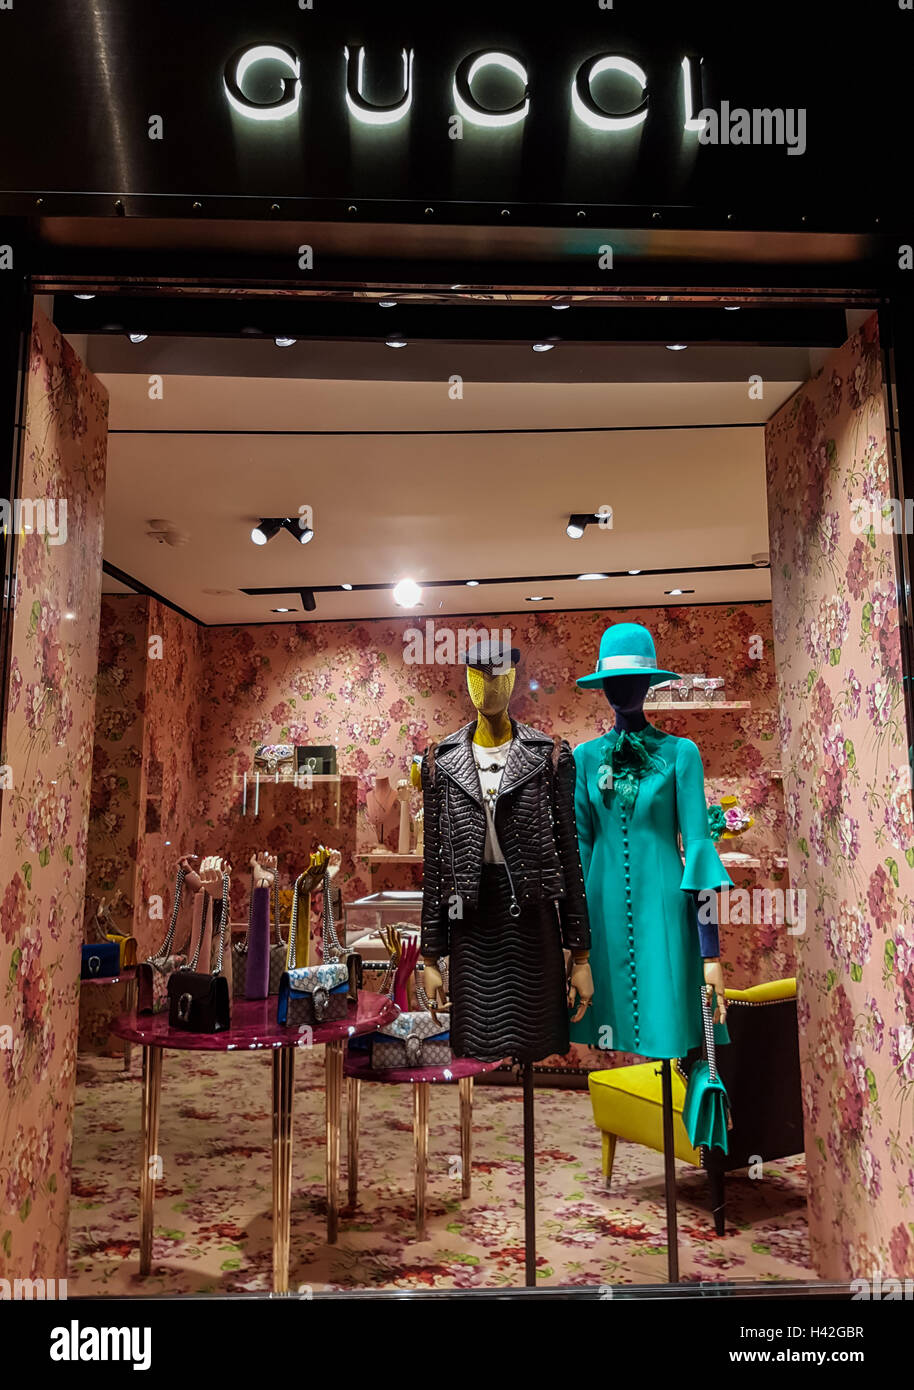 Gucci luxury bags, clothes and shoes sit displayed for sale inside a Gucci store. Stock Photo